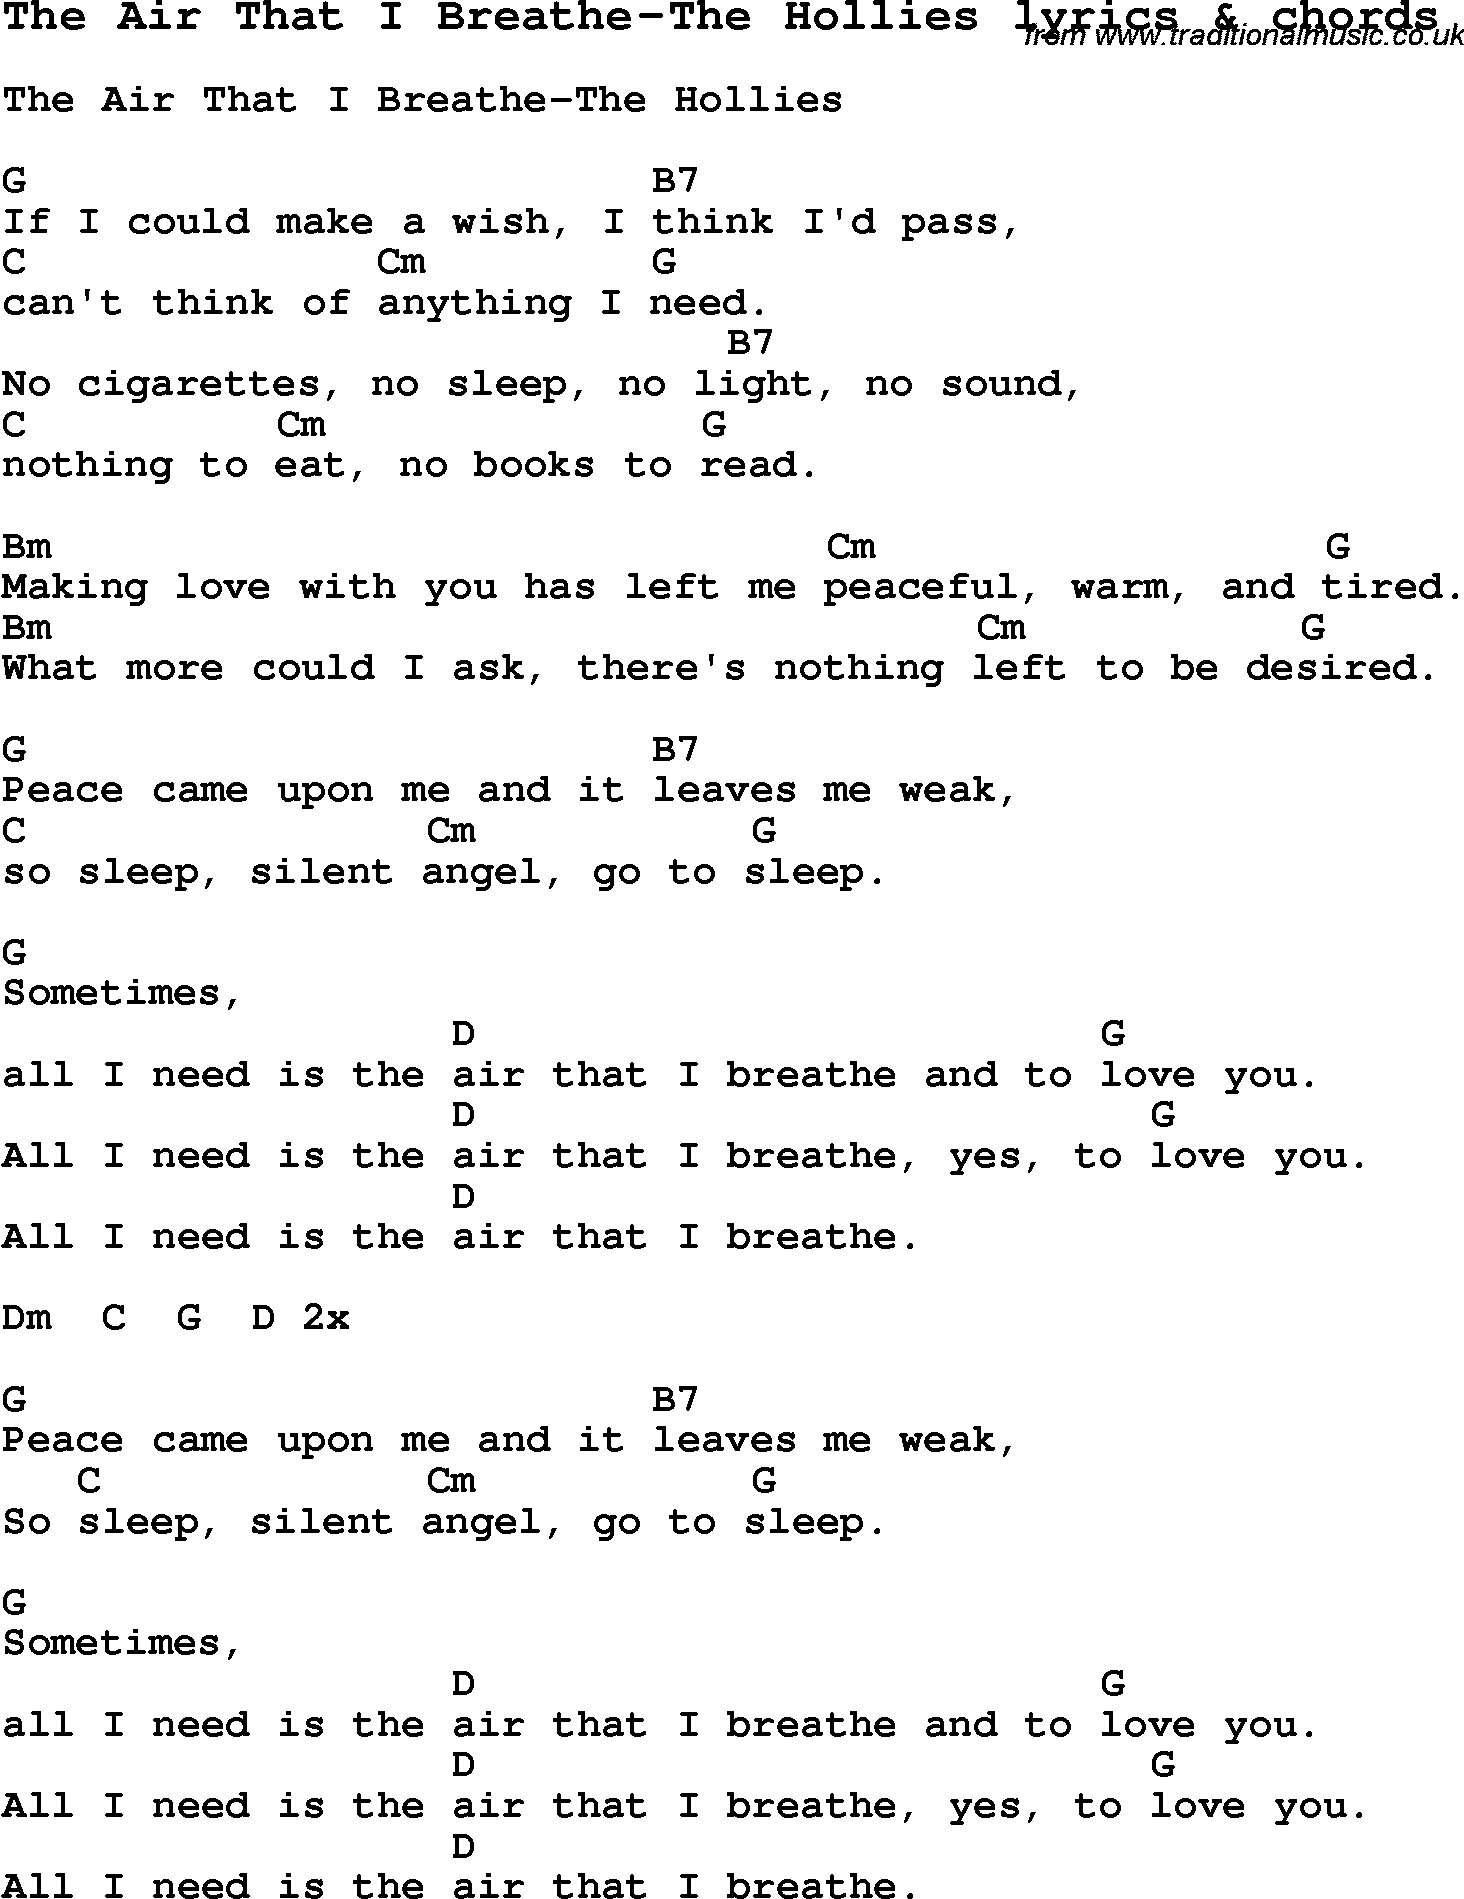 Love Song Lyrics for: The Air That I Breathe-The Hollies with chords for Ukulele, Guitar Banjo etc.